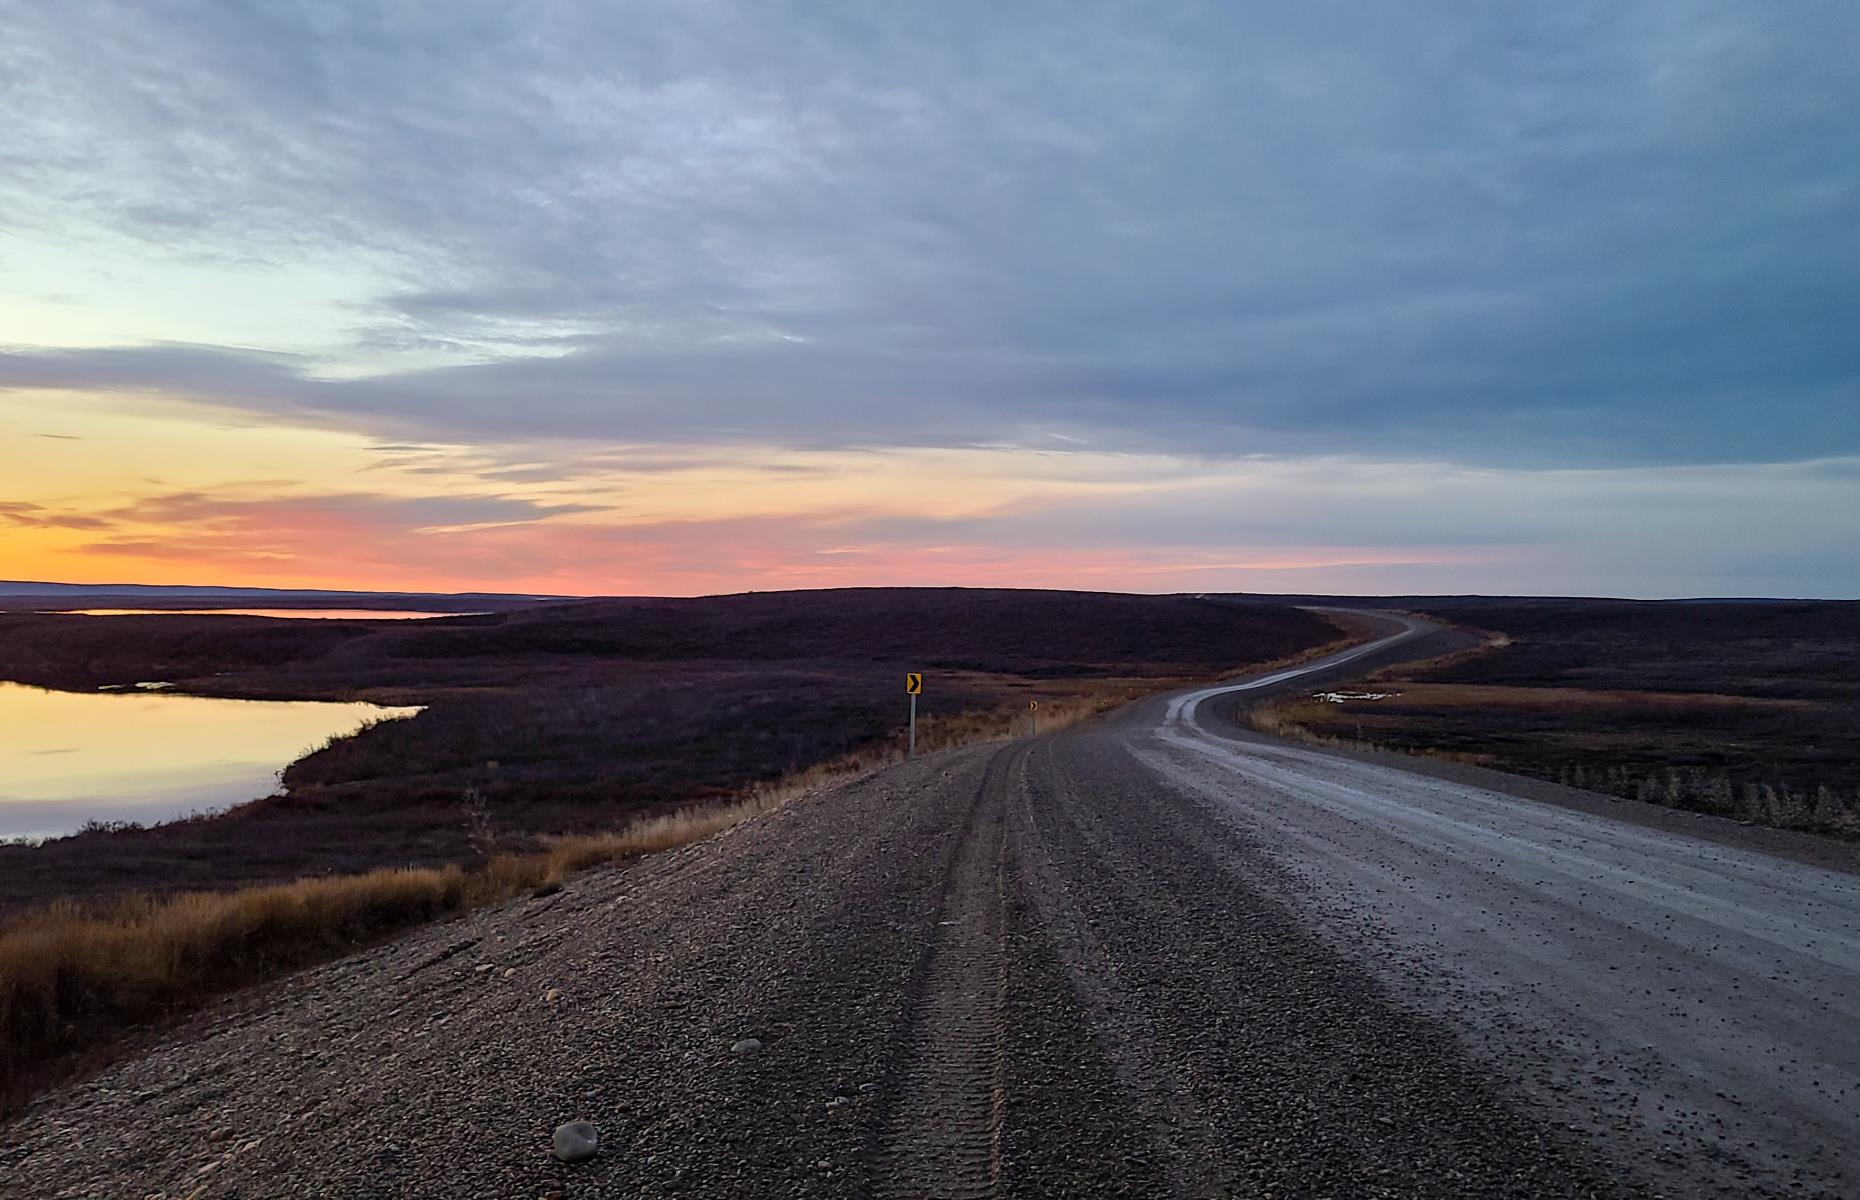 It’s easy to get just about anywhere by road in the southern part of Canada, but building roads in the Arctic is tricky business. Getting from Inuvik to the Arctic Ocean previously was only possible by plane or a winter-only ice road, but in 2017 the 86-mile (138 km) Inuvik-Tuktoyaktuk Highway opened, allowing visitors to drive directly to the Inuvialuit hamlet of Tuktoyaktuk. The road is rugged and somewhat difficult to drive, but it is the first Canadian all-weather road to the Arctic Ocean.